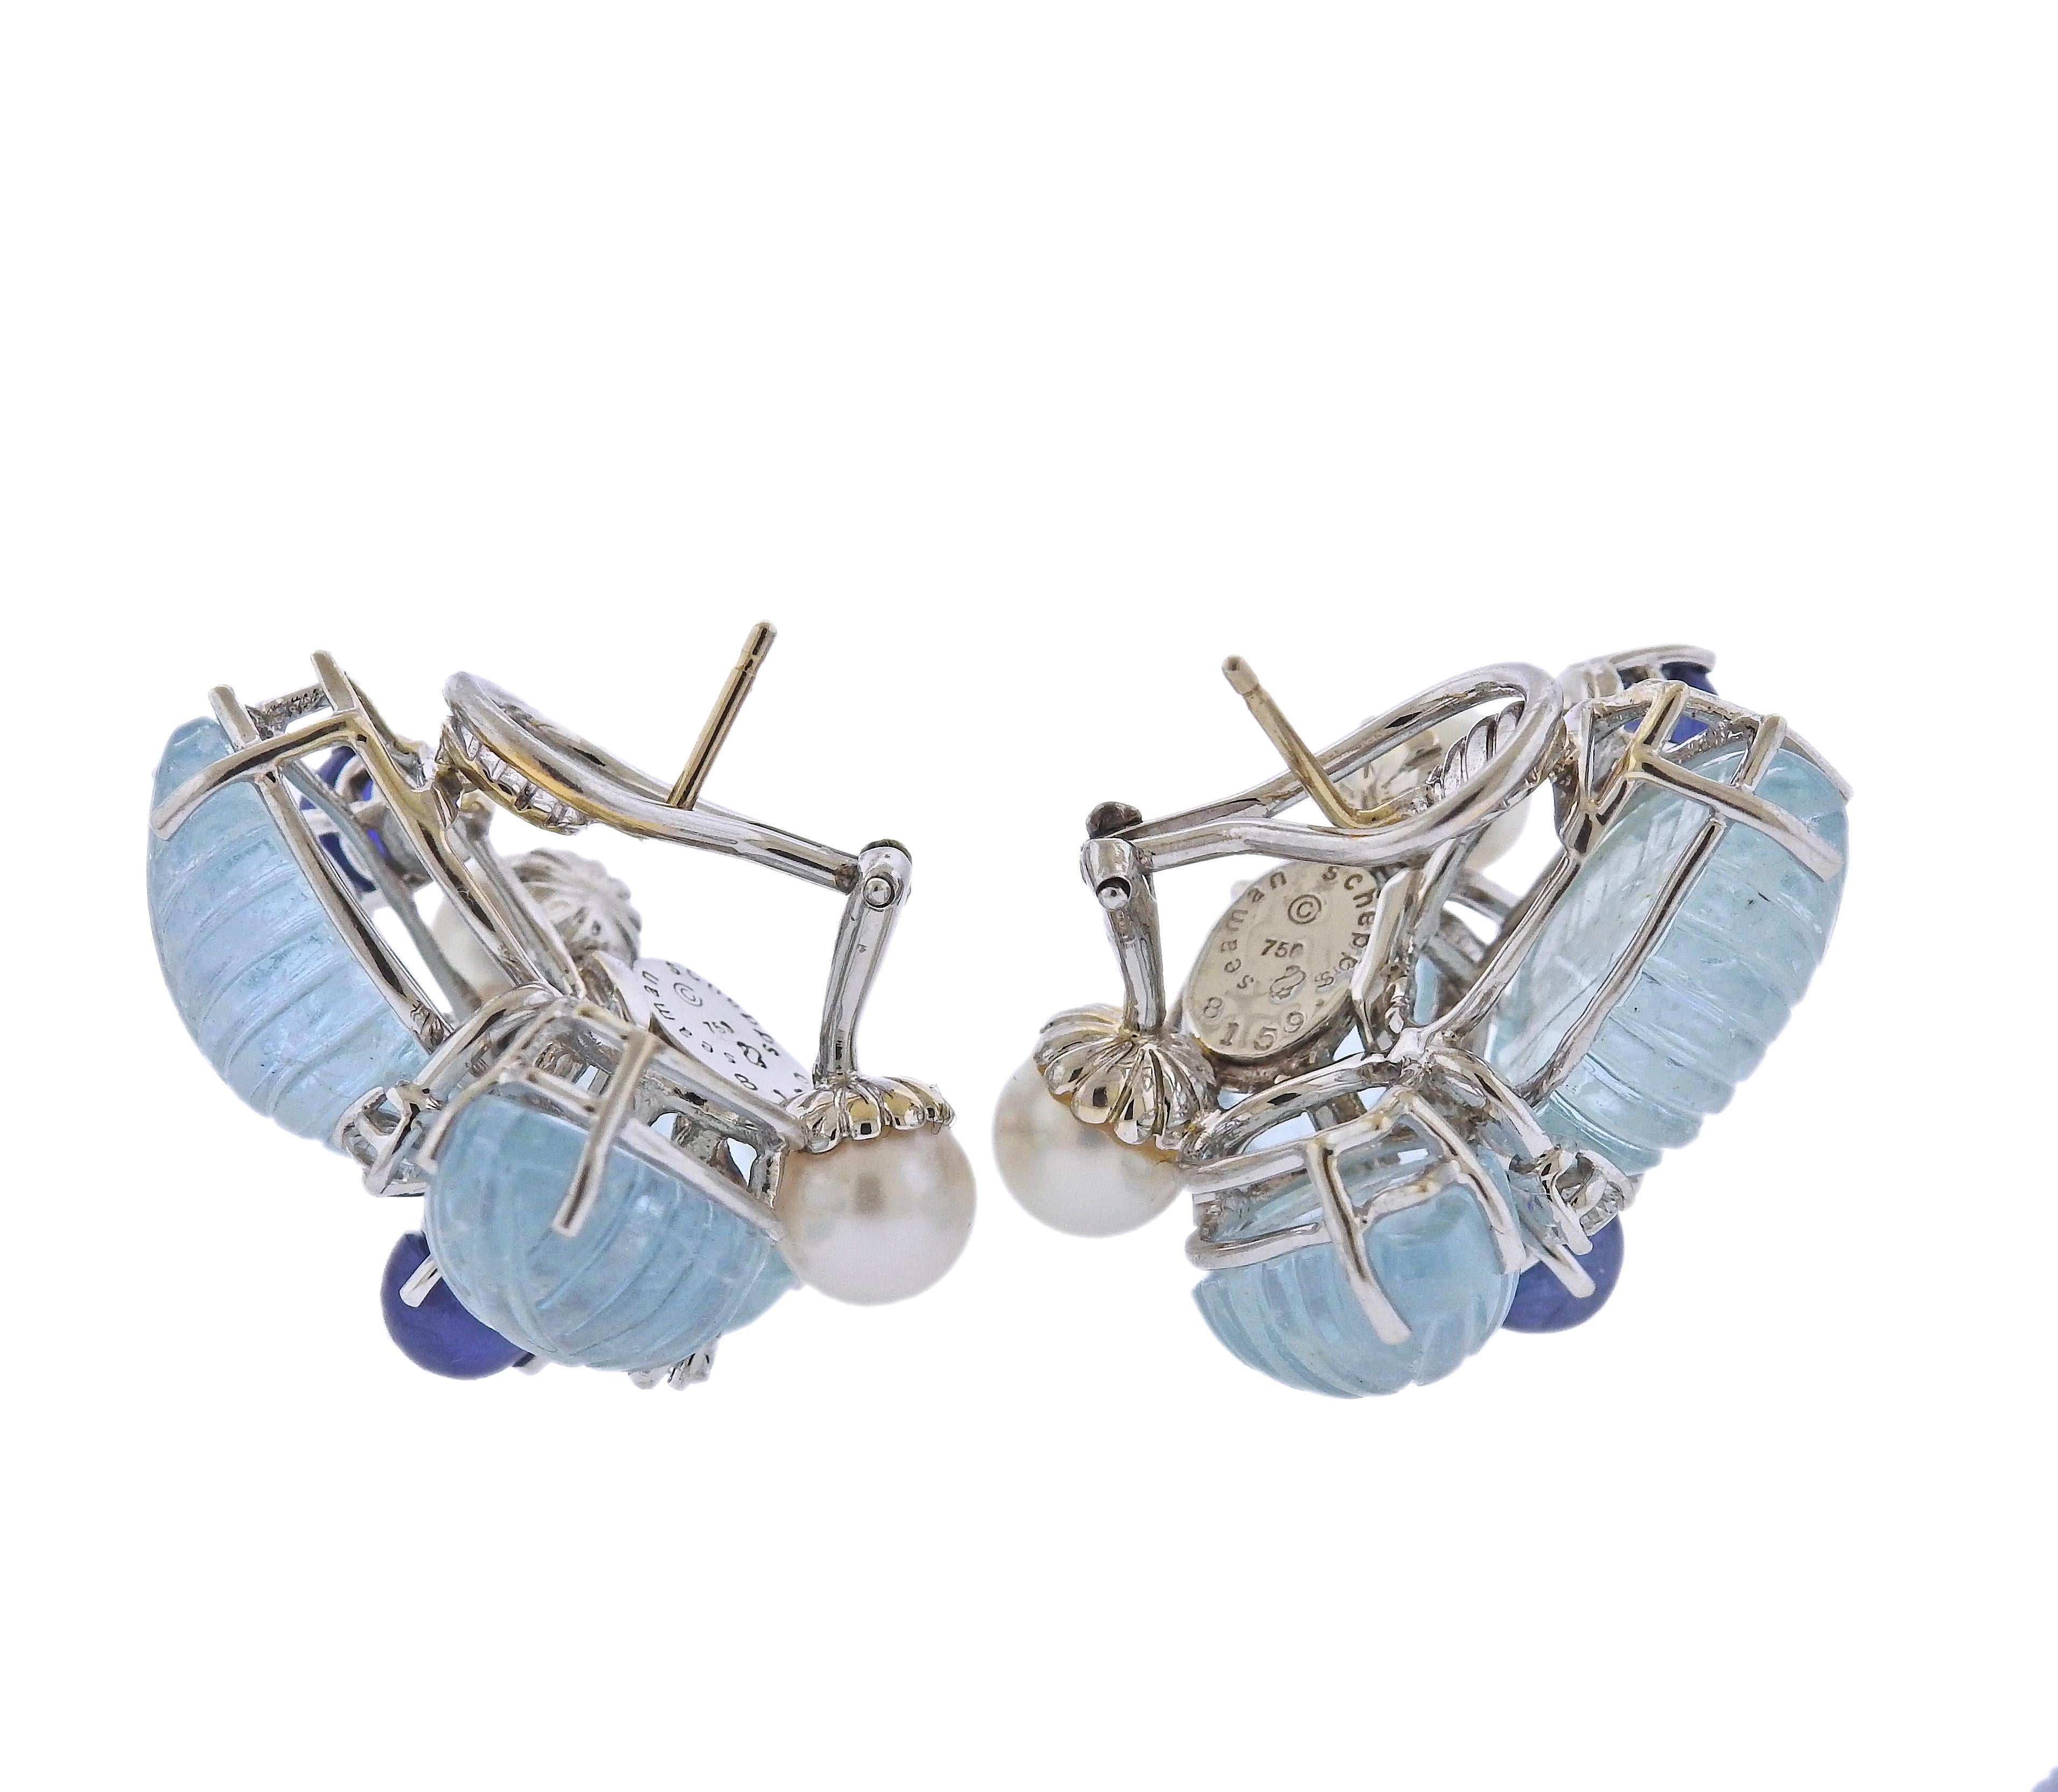 Pair of 18k gold earrings by Seaman Schepps, with carved aquamarines, sapphires, pearls and approx. 0.38ctw in G/VS diamonds.  Come with Seaman Schepps box.  Earrings are 31mm x 29mm. Weight - 29.4 grams. Marked:  750, Shell hallmark, Seaman